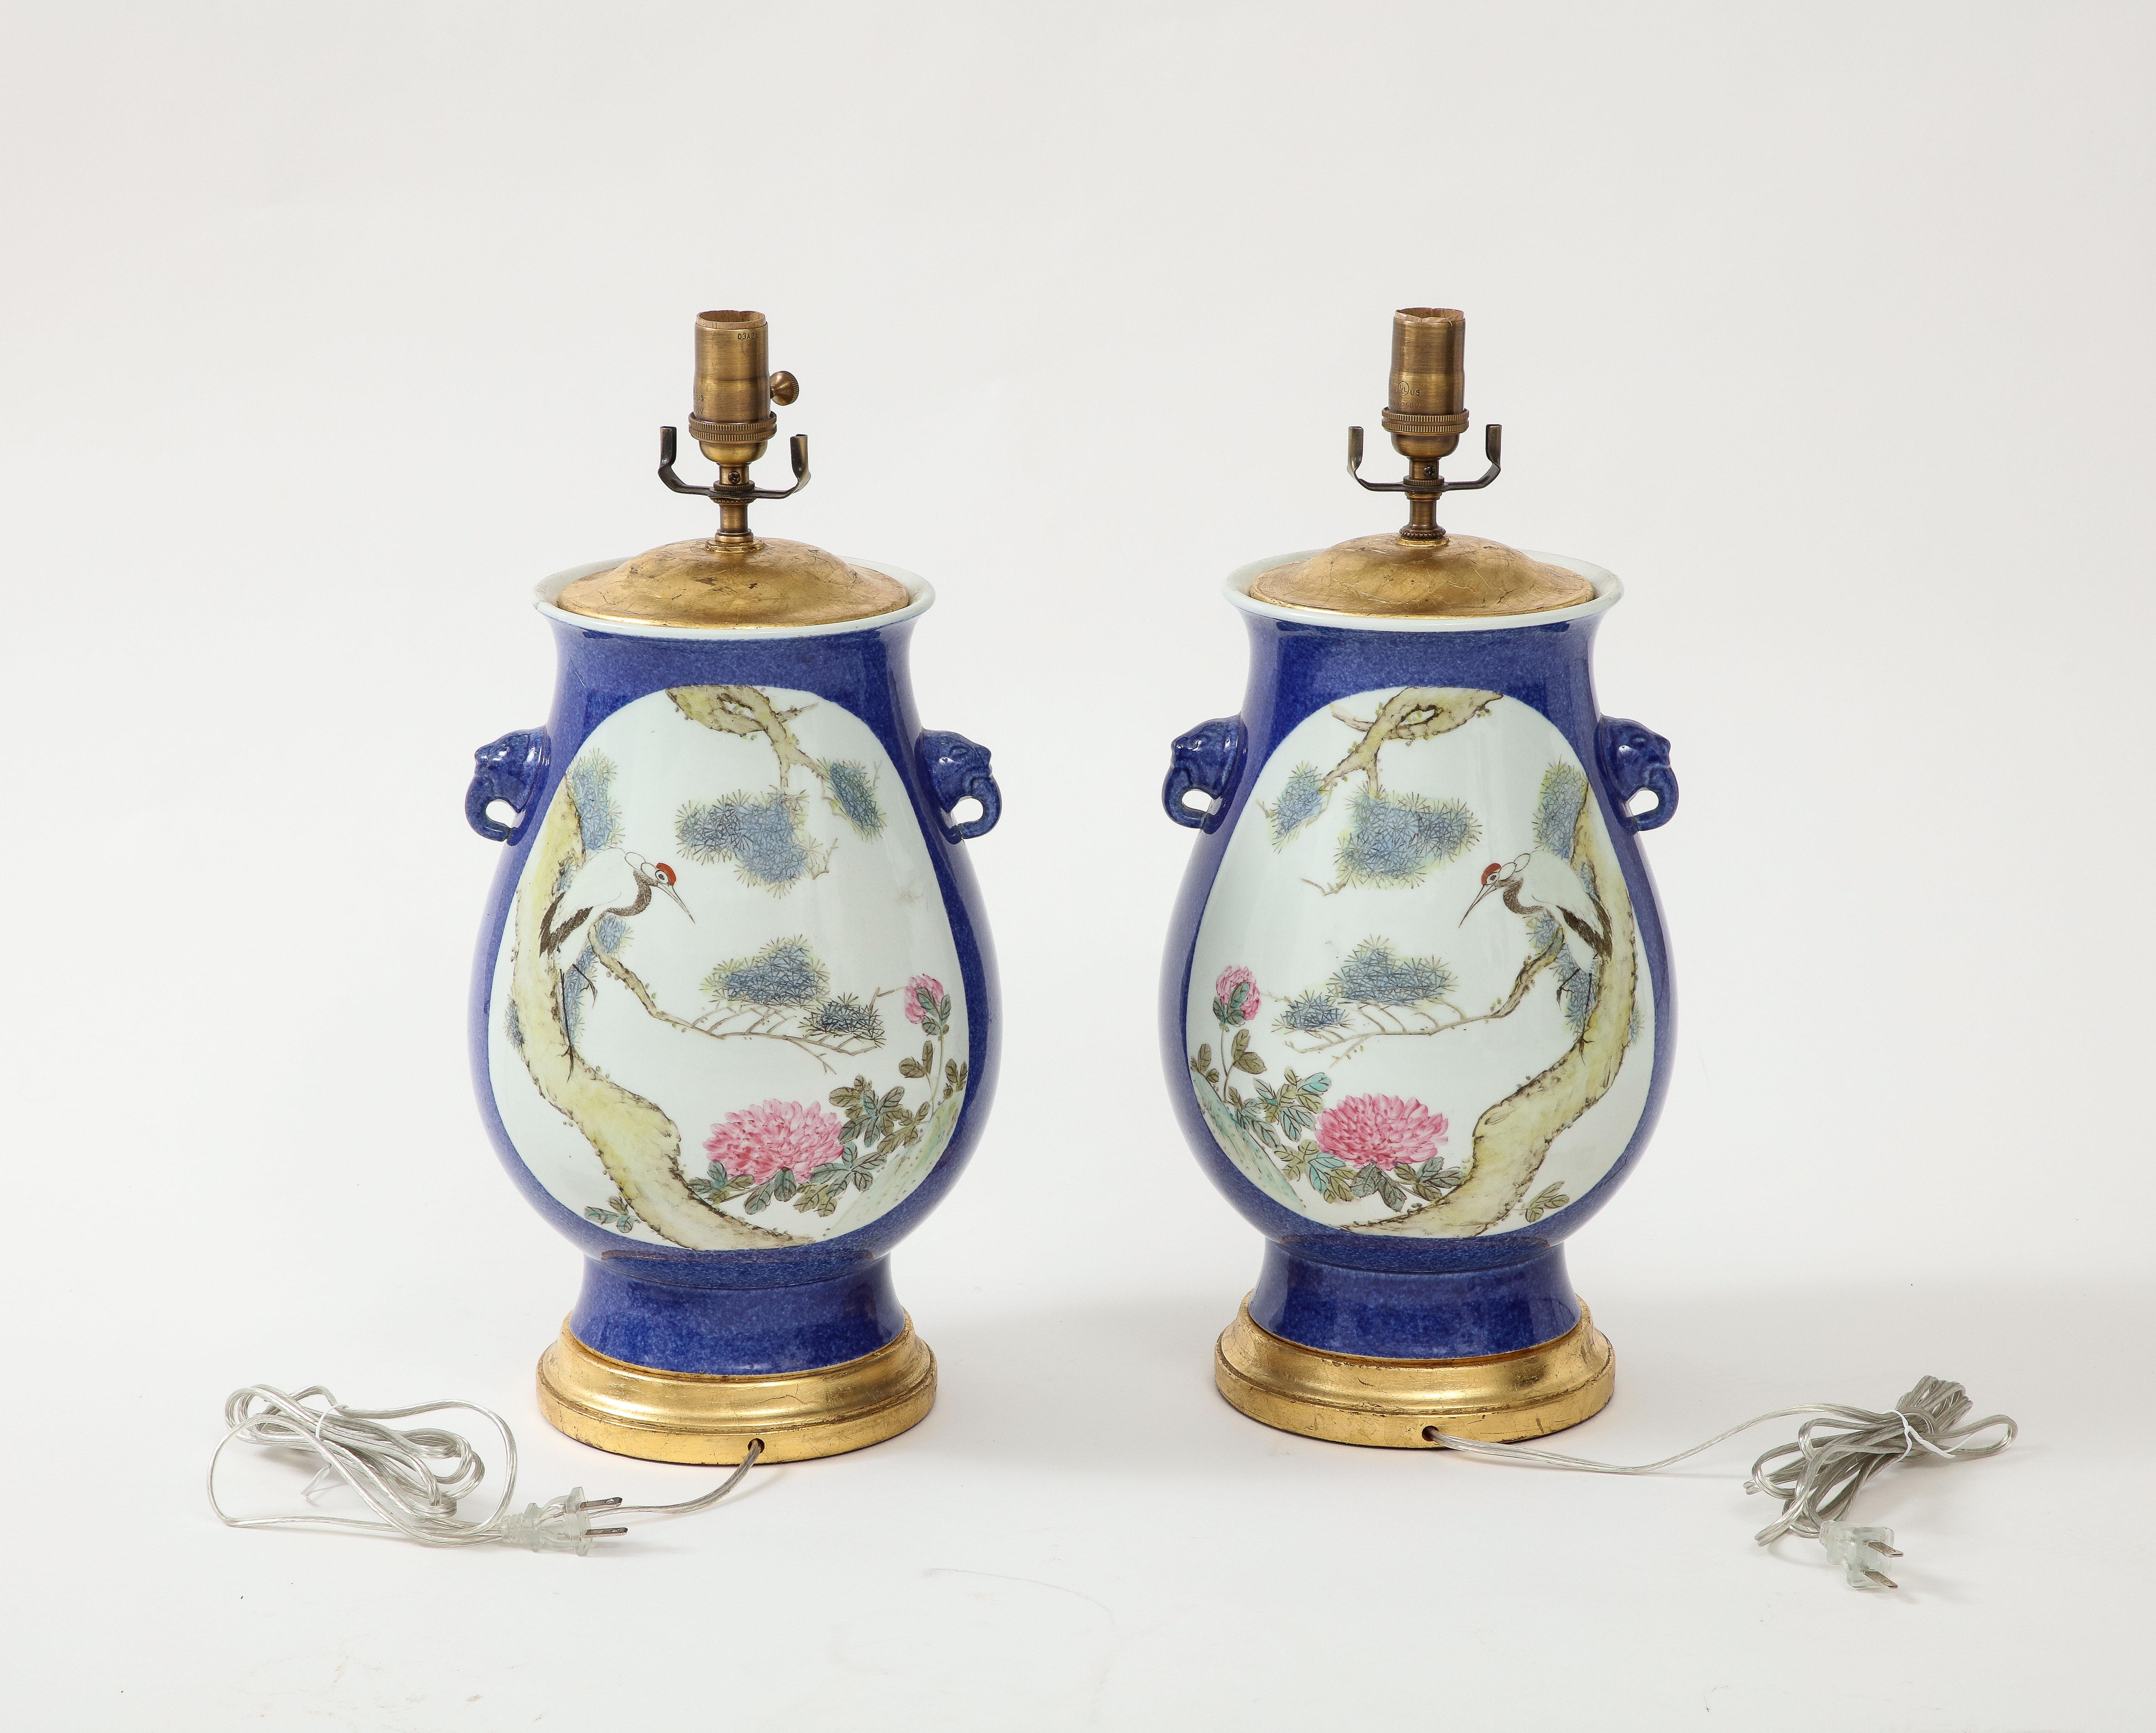 Pair of Chinese Porcelain Lamps 19